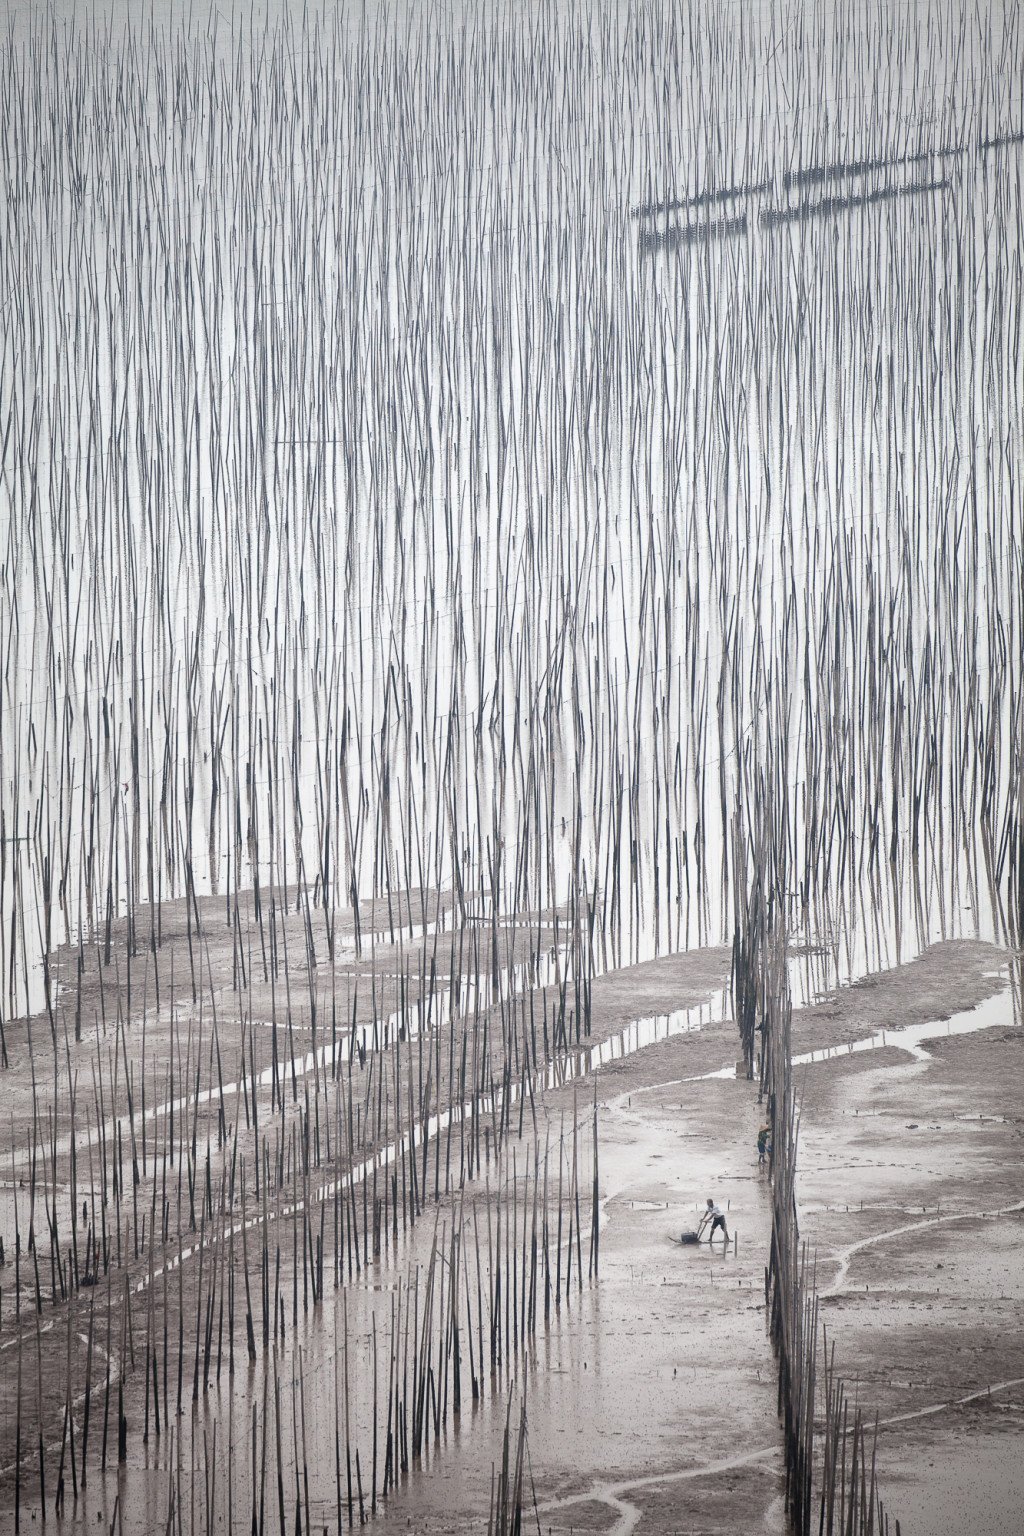 Chinese man using a glider on the mudflats of XiaPu, China. The bamboo sticks create a surreal, painterly scene.